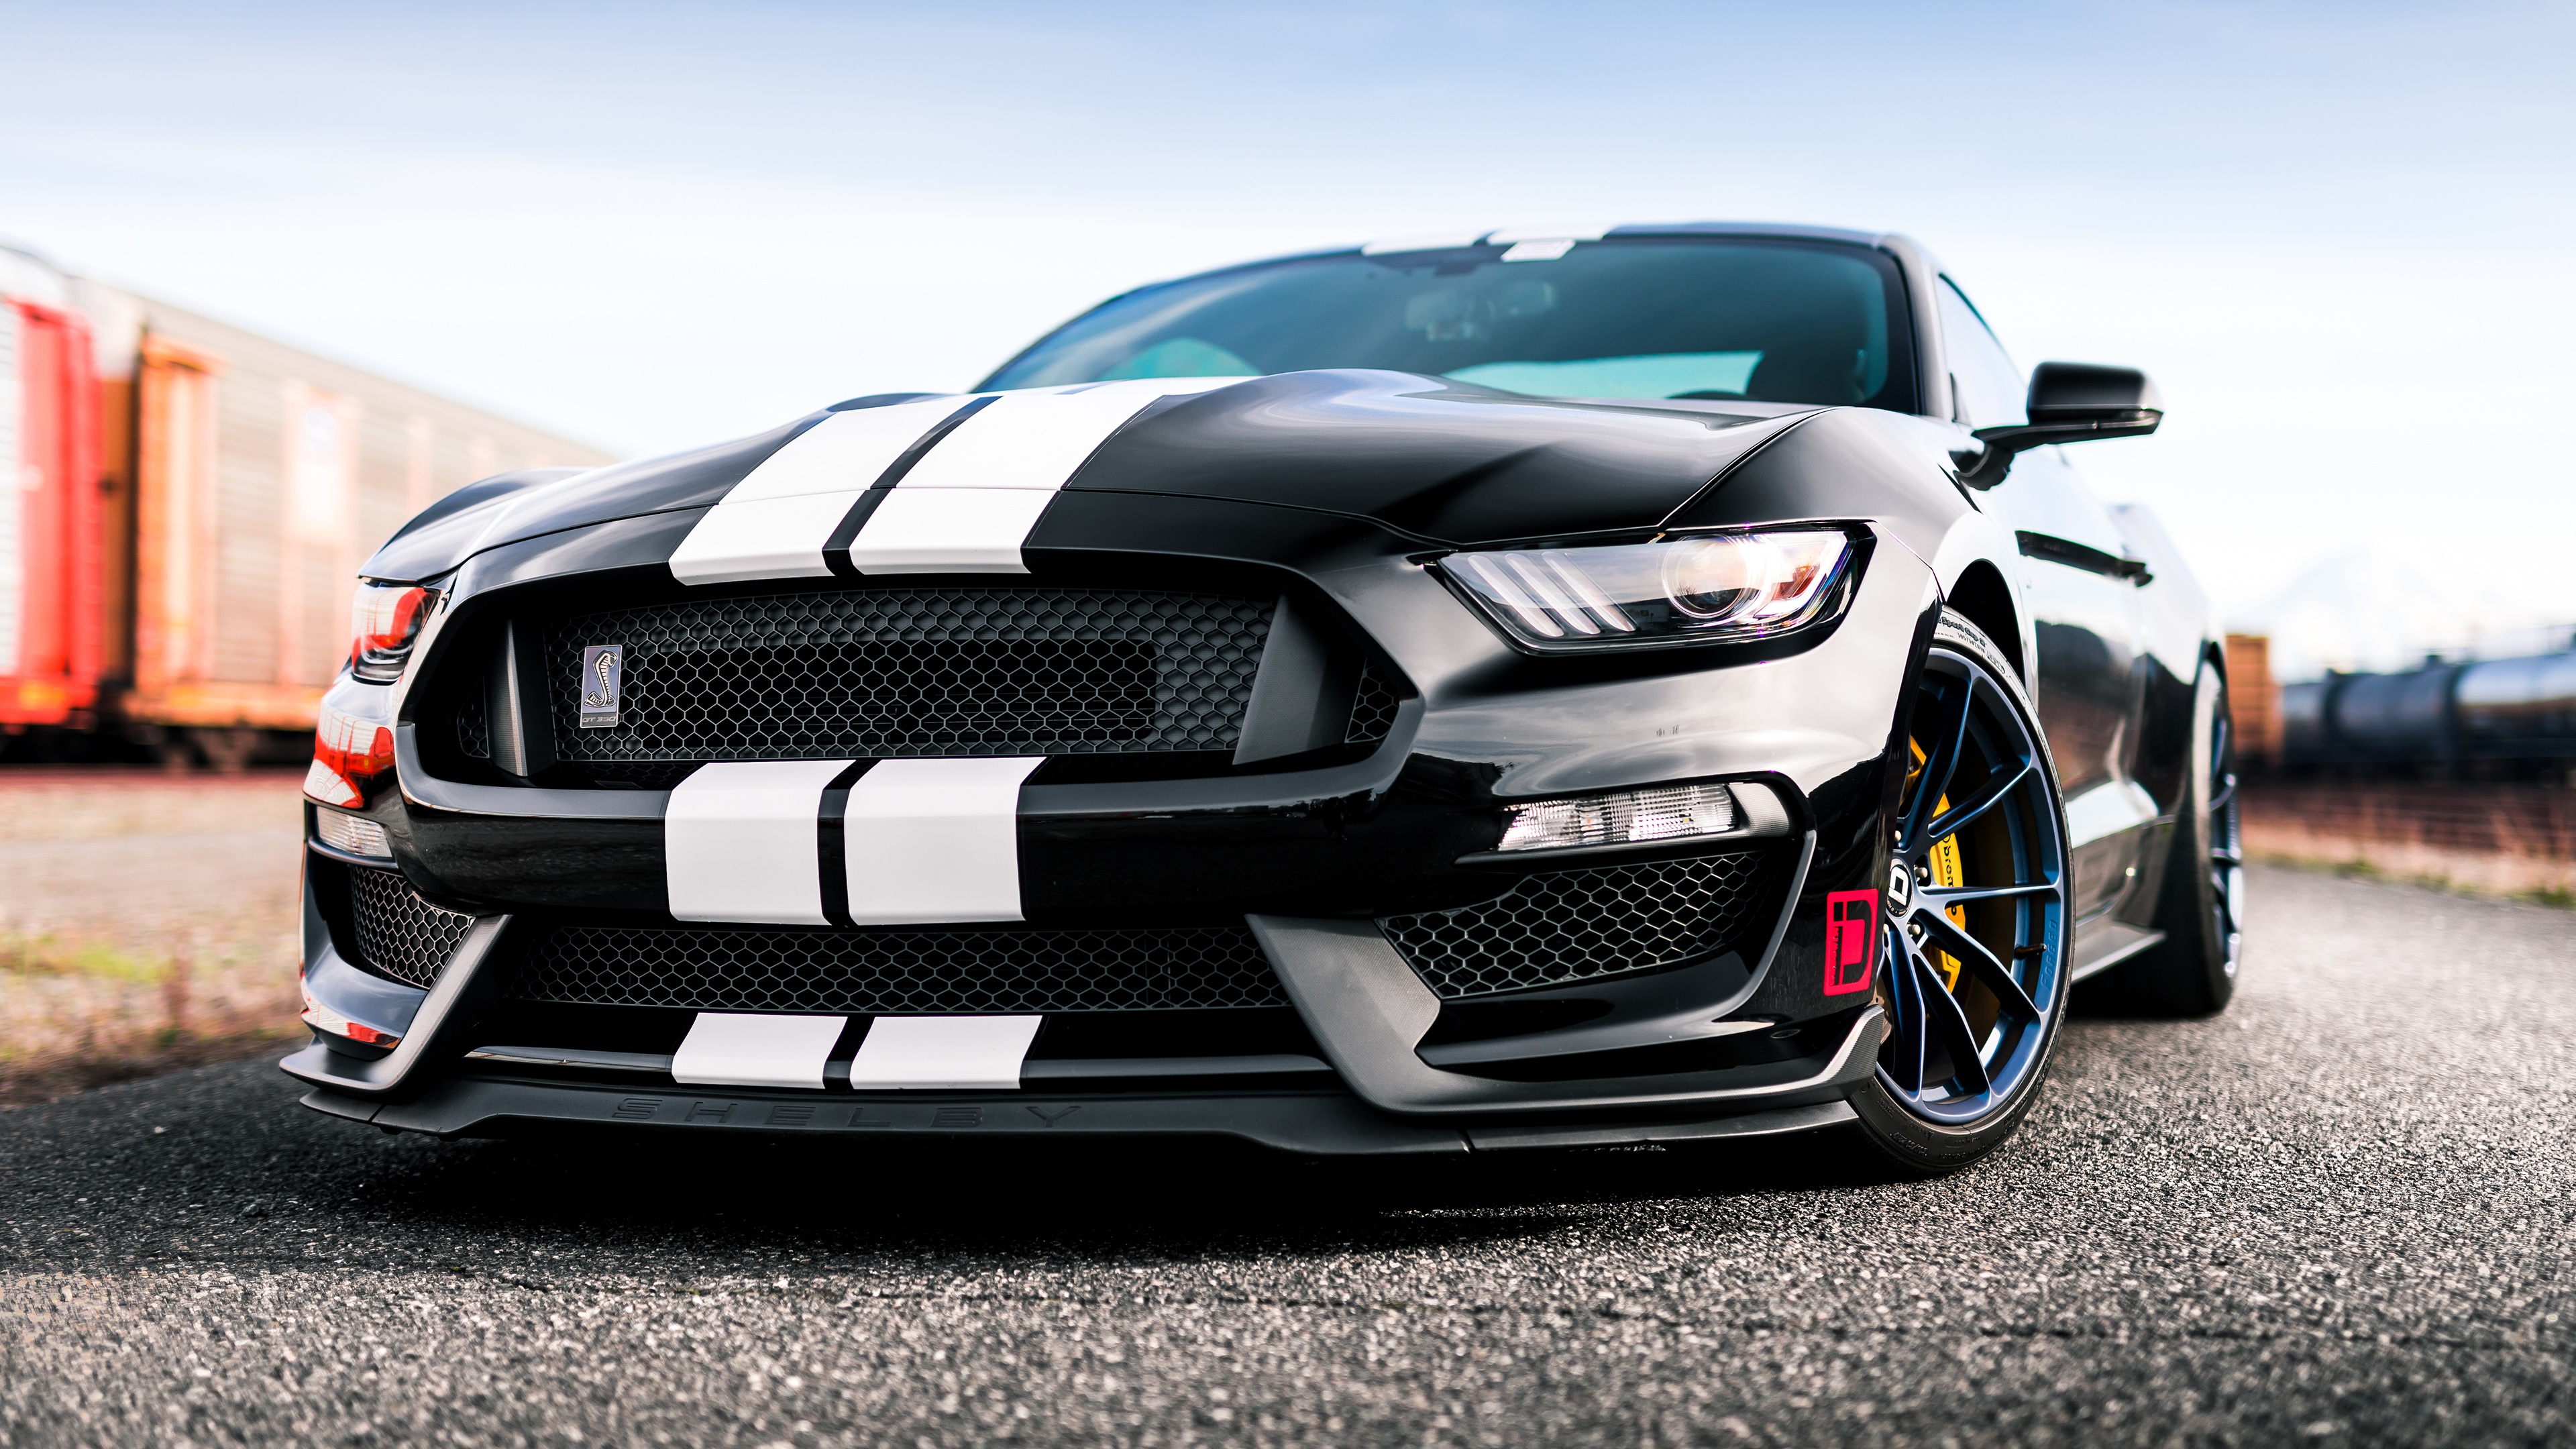 Ford Mustang Shelby Ford Mustang Ford Car Muscle Car Black Car 3840x2160